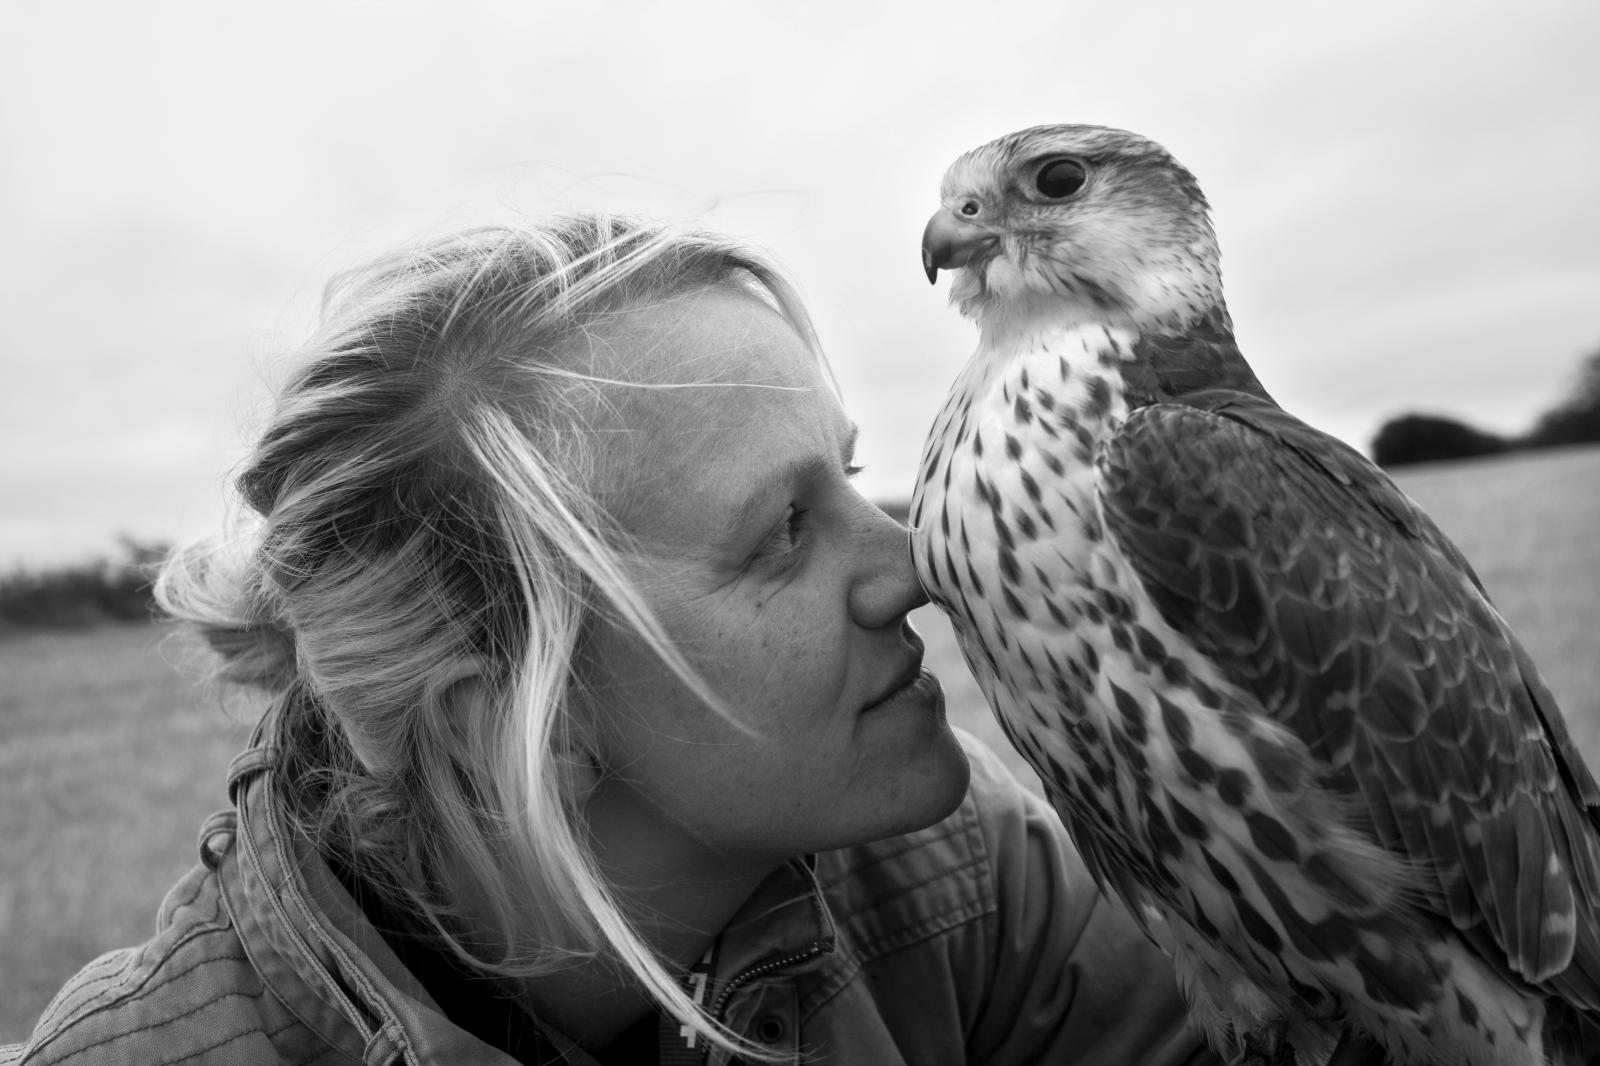 Louise Hoffbeck after finishing daily fly with her Saker Falcon.